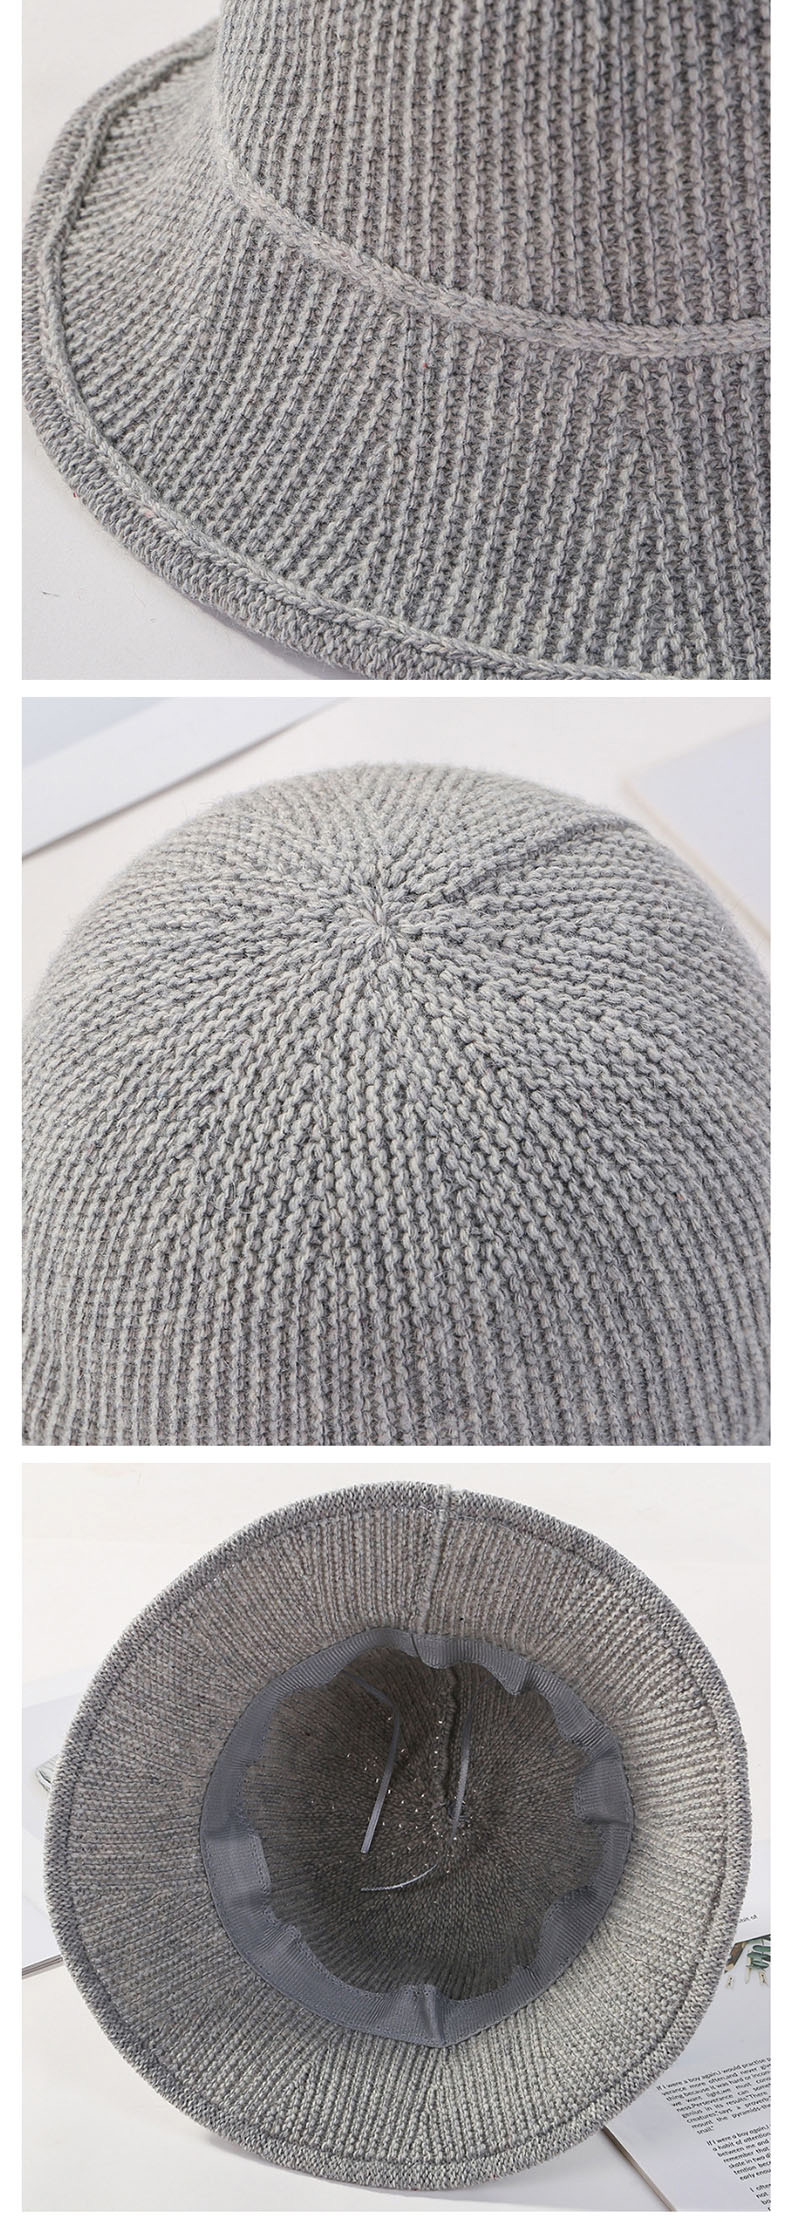 Fashion Dark Gray Knitted Wool Fisherman Hat,Beanies&Others